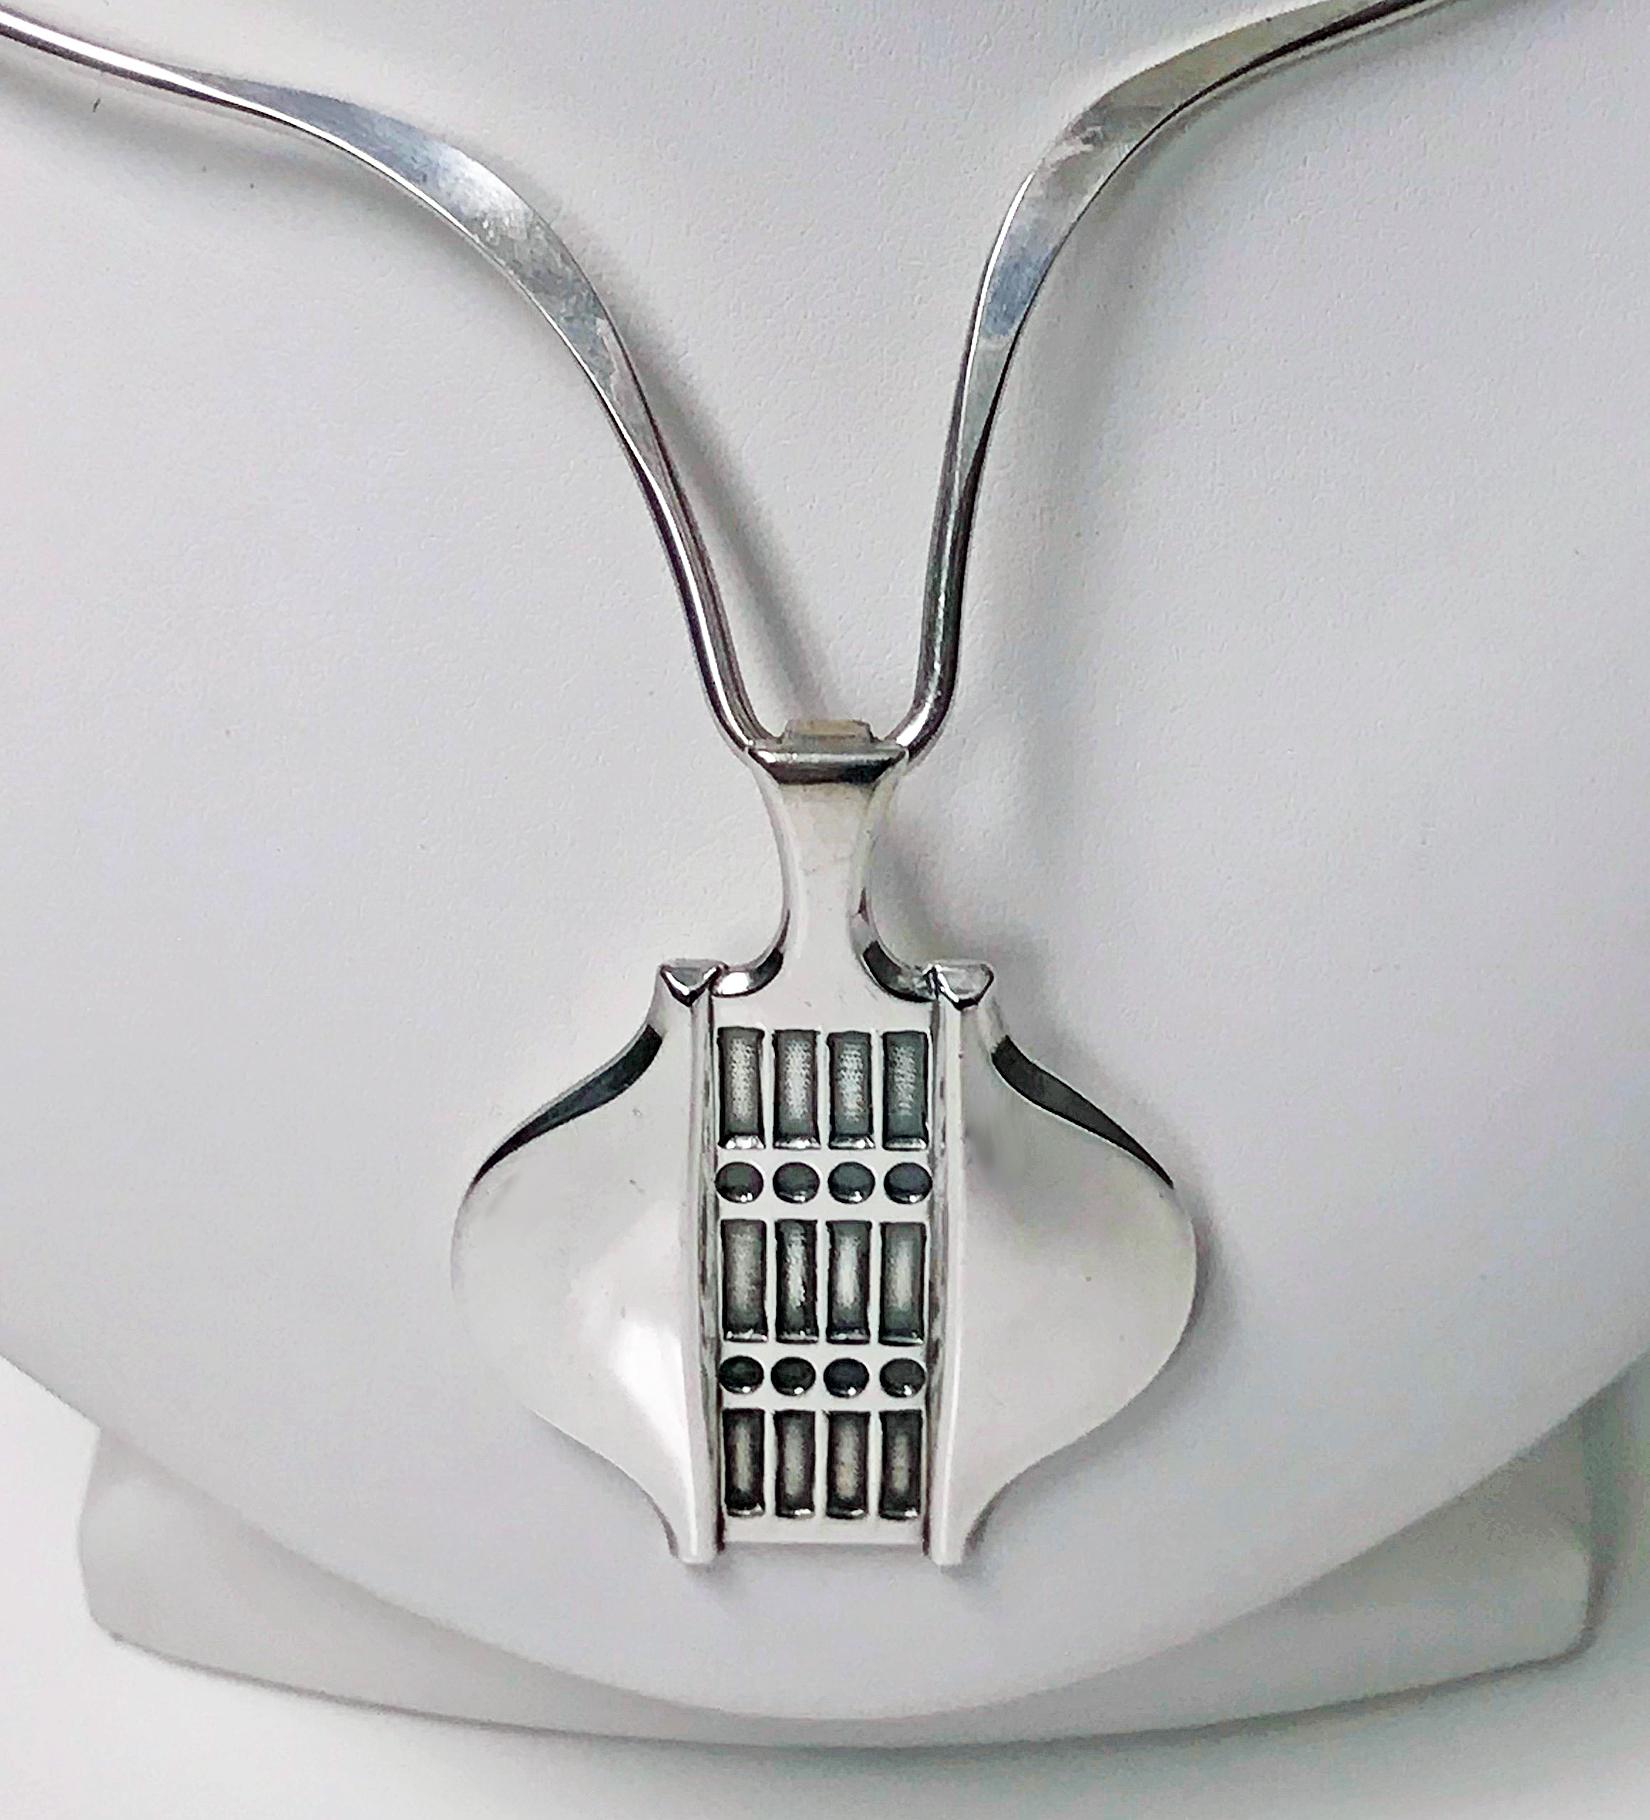 Rare Design David Andersen Modernist Sterling Silver Necklace Norway C.1970. The Necklace with rectangular panels inter spaced with circlets and polished shaped surround. Form fitting flexible collar. All with David Andersen marks. Weight: 31 grams.